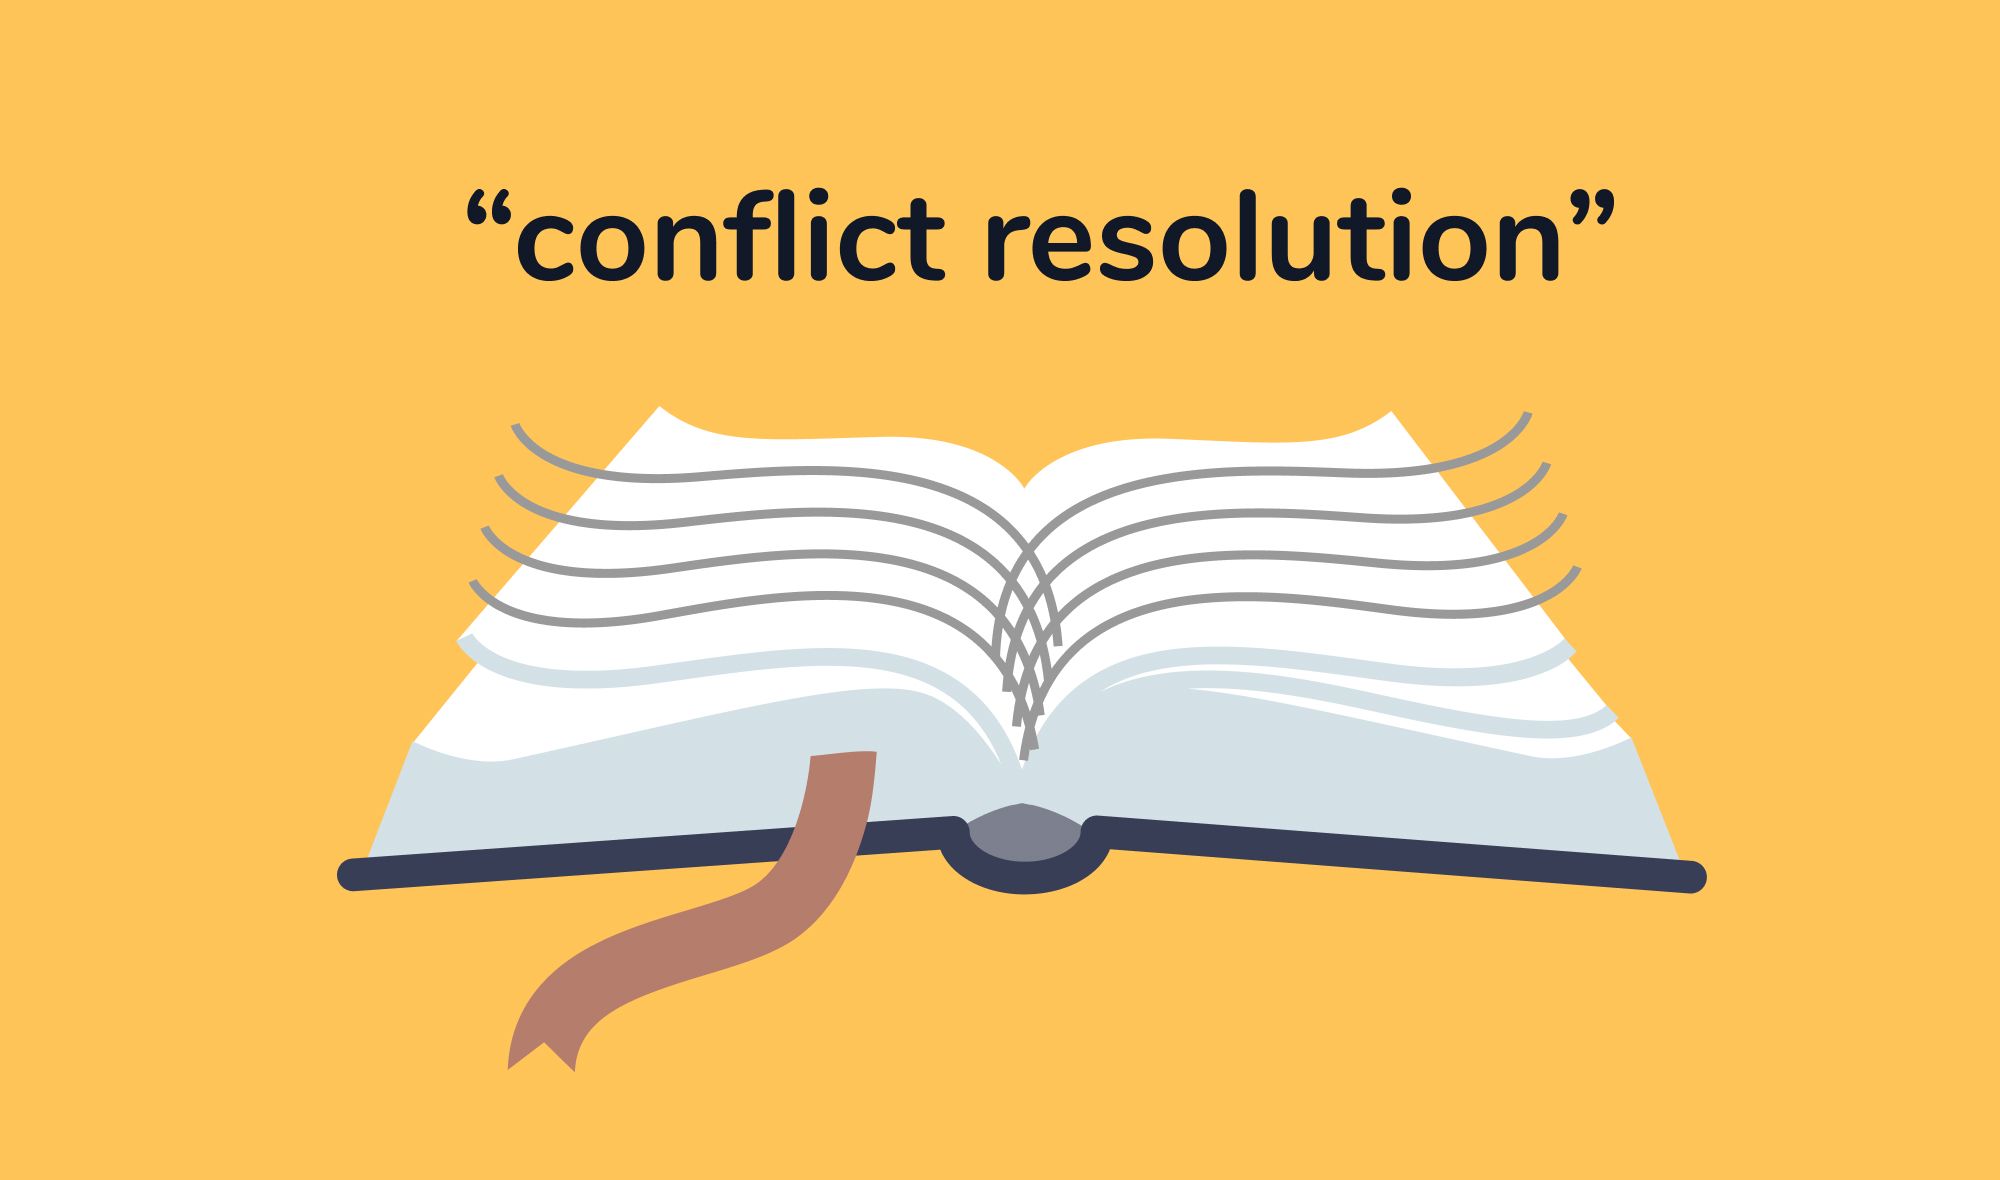 The true meaning of conflict resolution